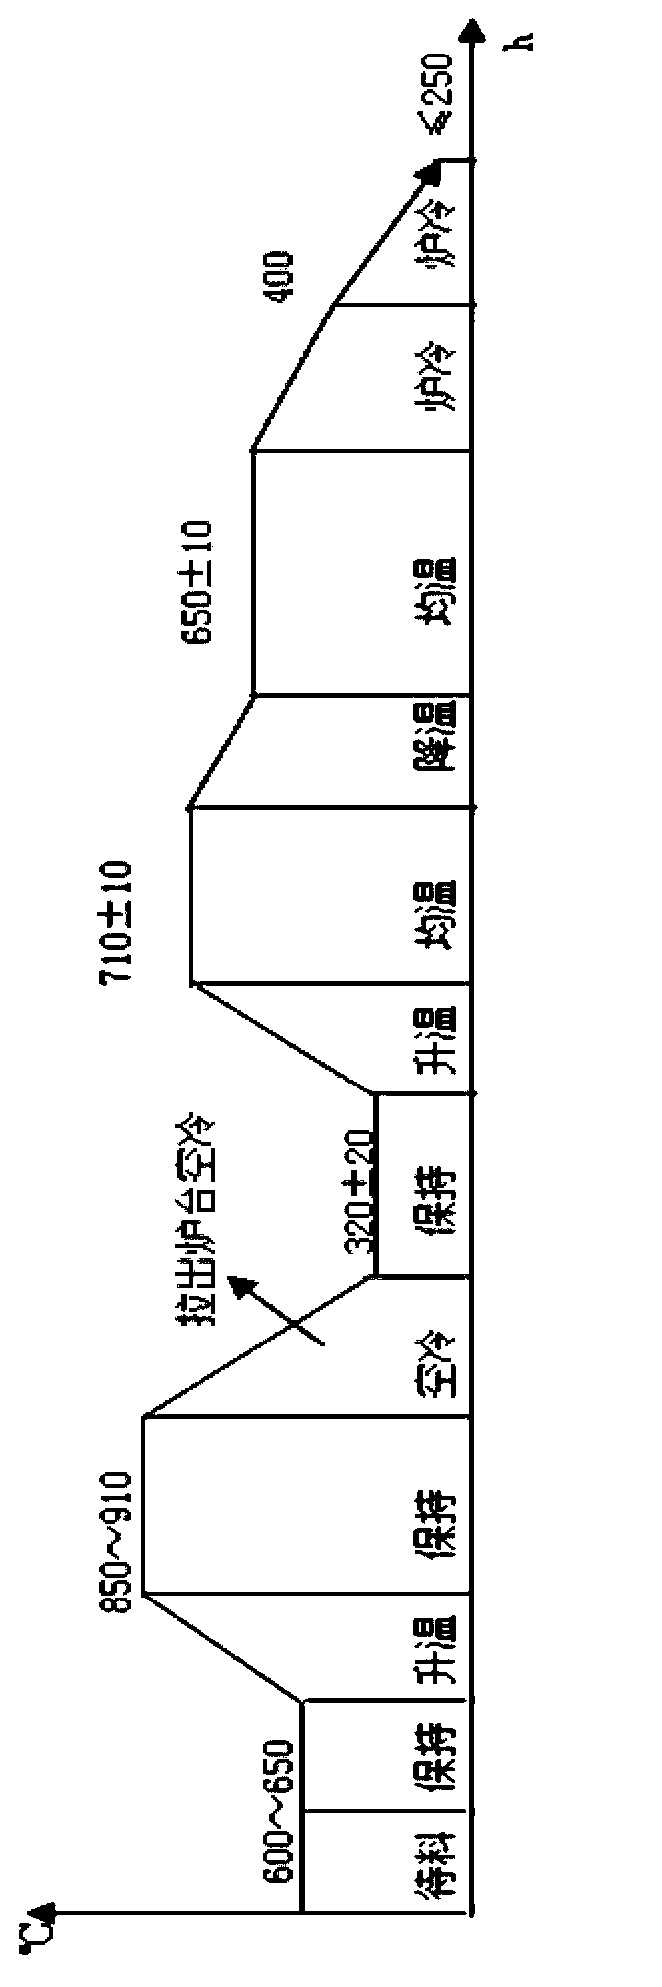 After-forging hydrogen diffusion and annealing method of forging material